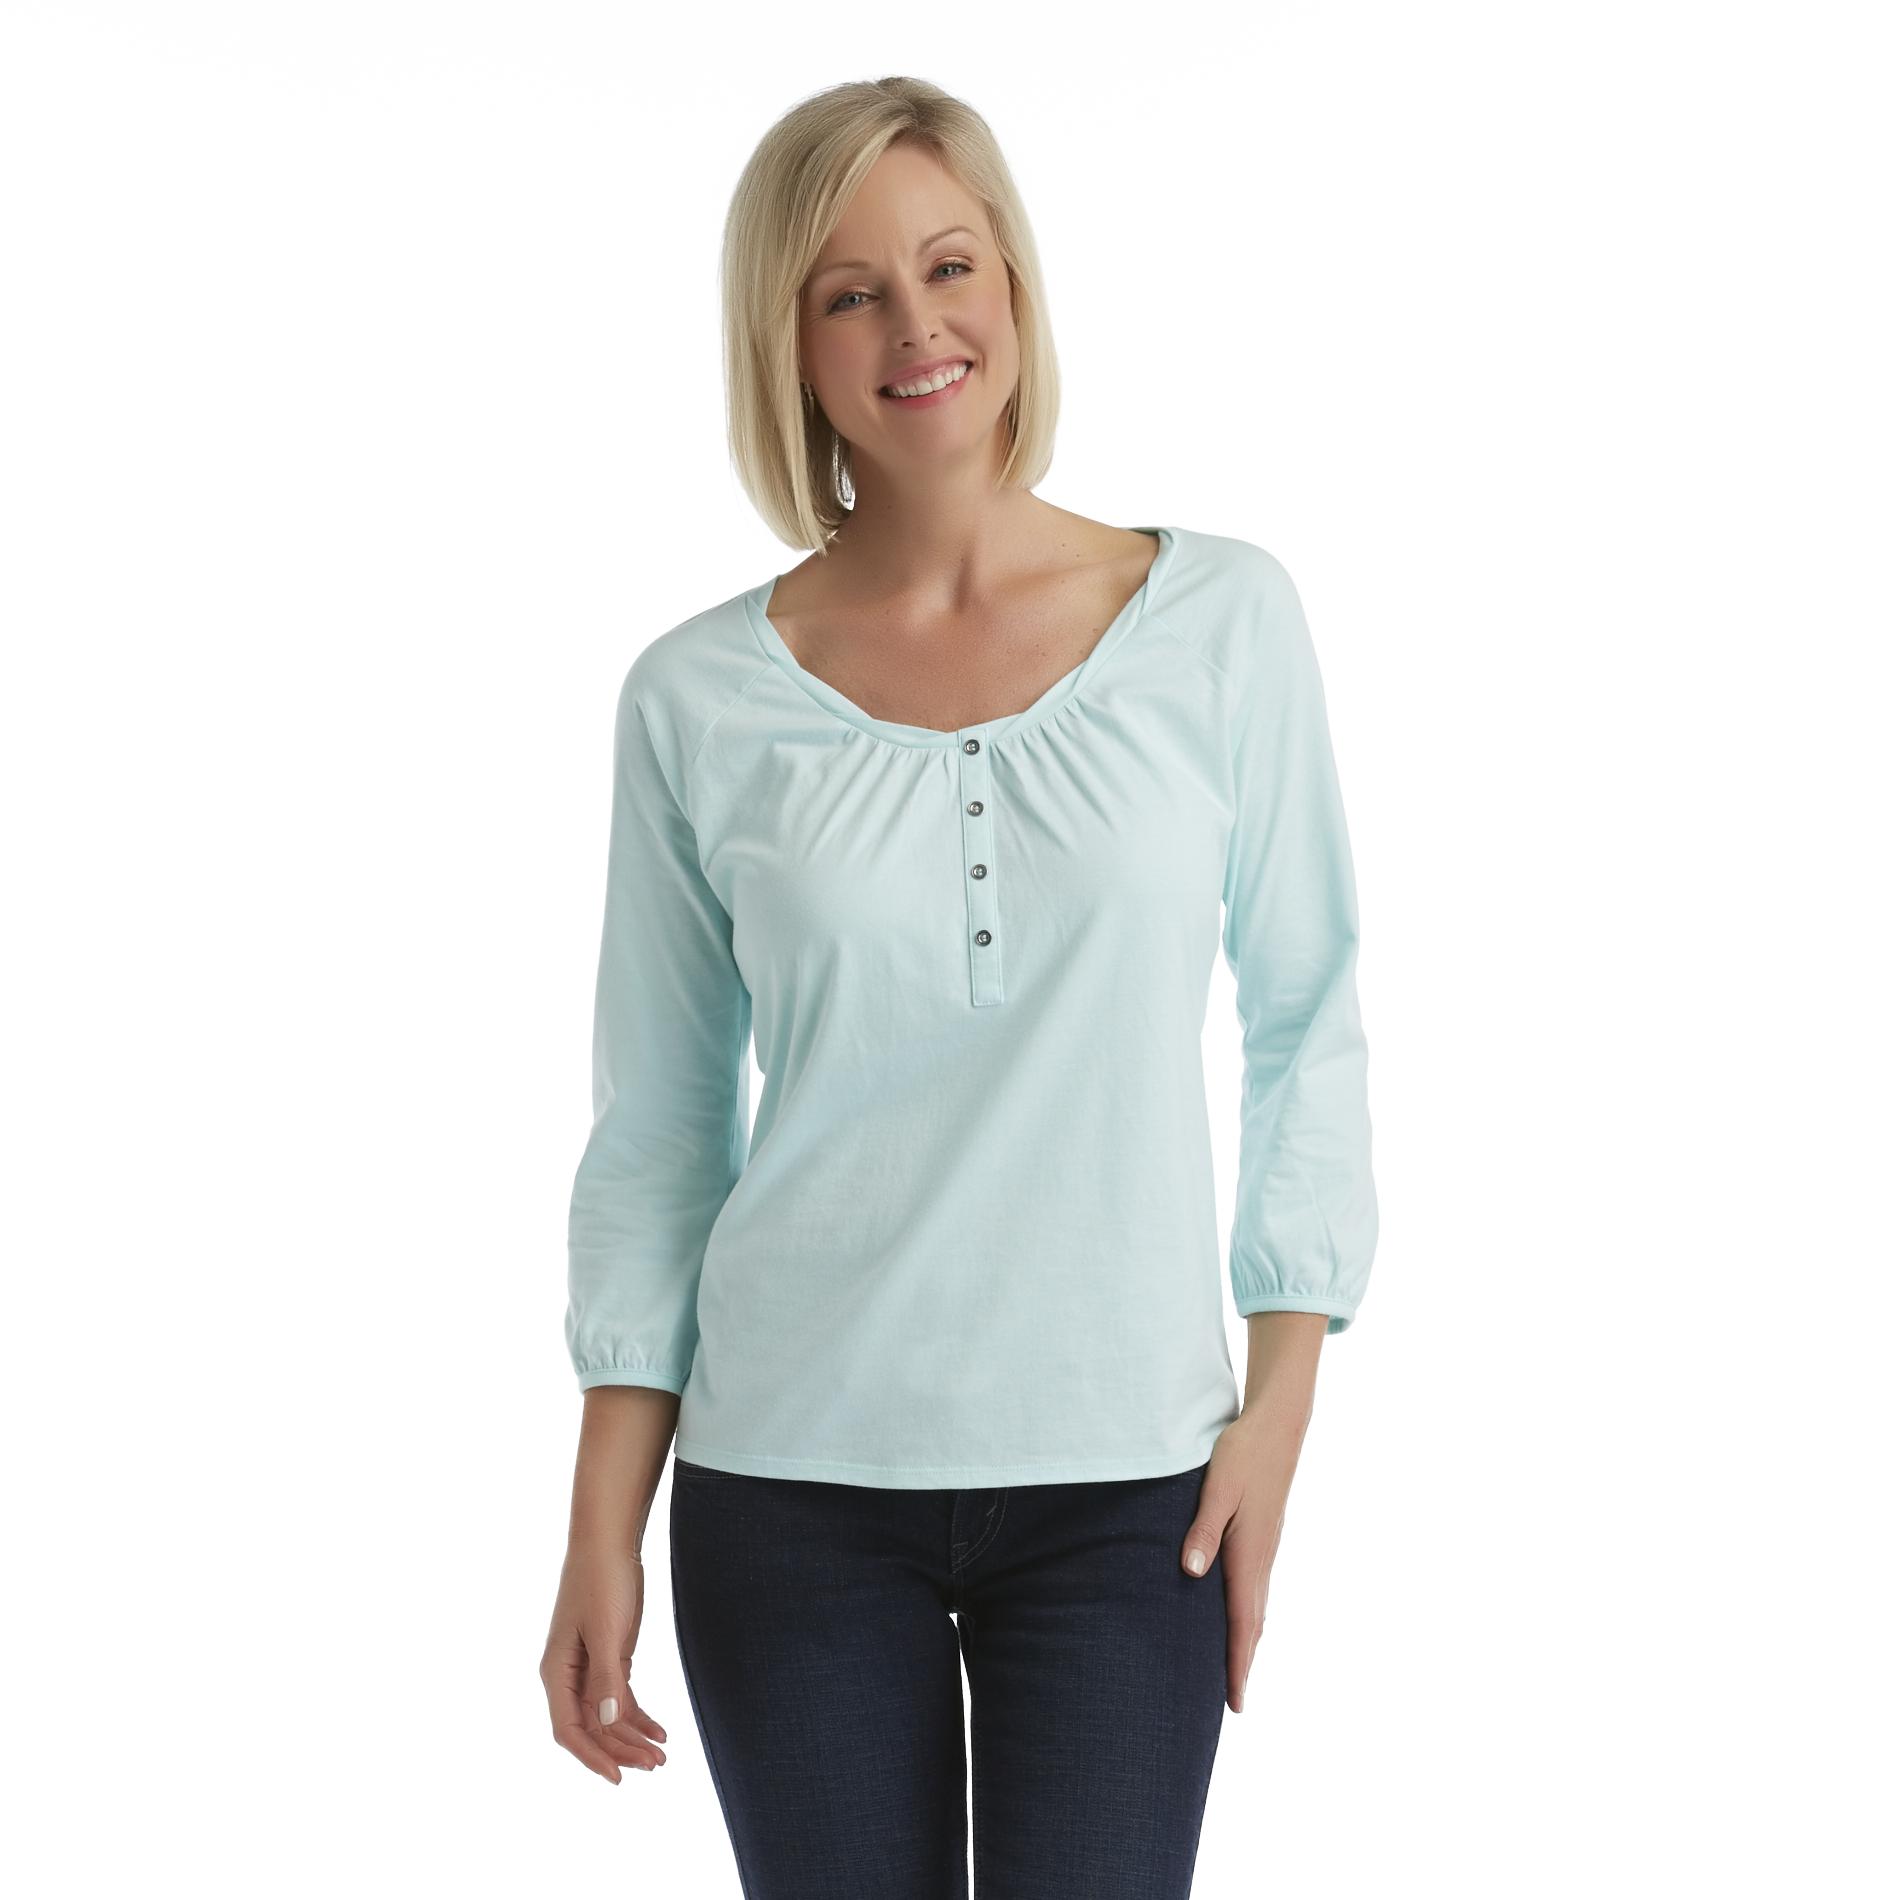 Basic Editions Women's Scoop-Neck Knit Henley Top